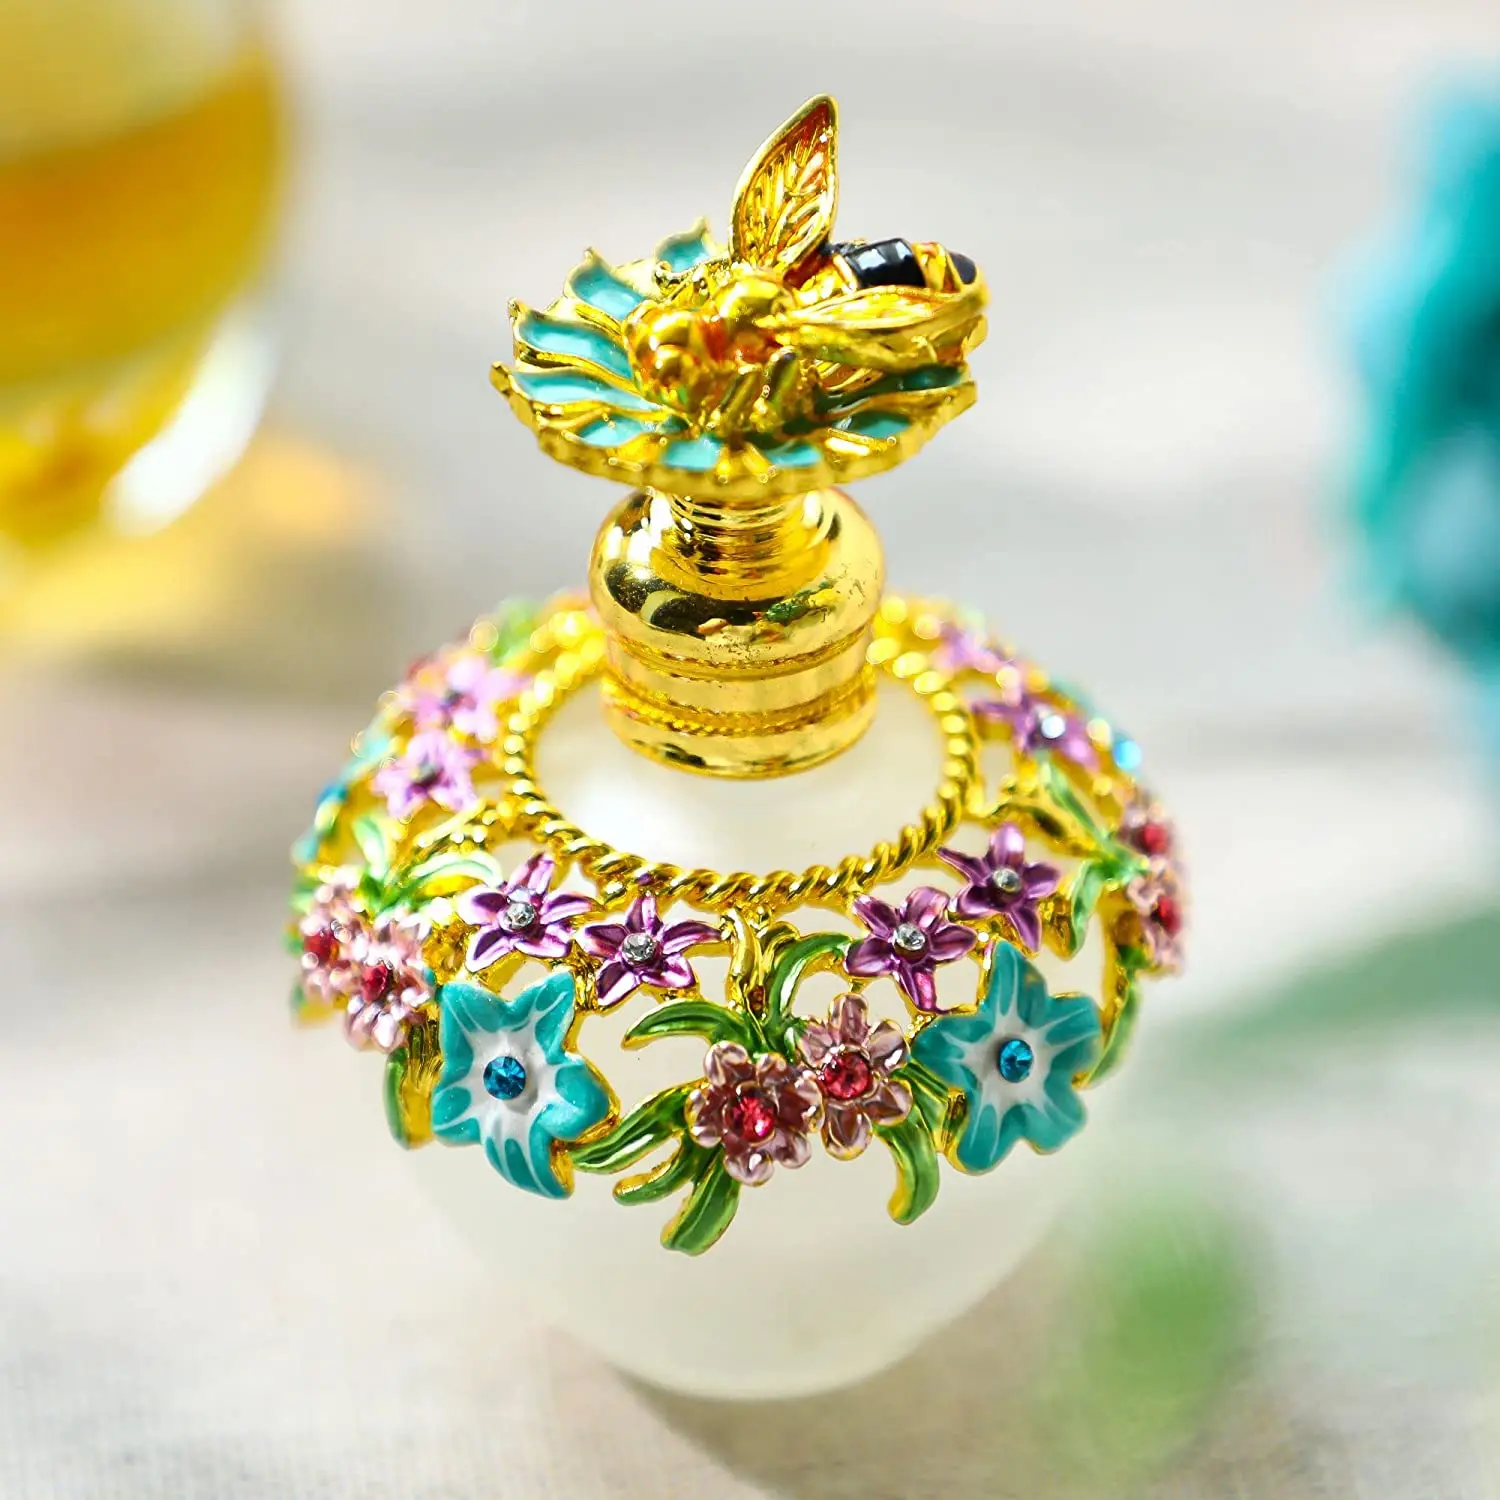 H&D Fancy Glass Perfume Bottle Empty with Flowers Bee Charm Decorative Vintage Crystal Perfume Decanter(Golden,40ML) polarized starry sky with irregular rectangle oval shape charm pendants 14k gold plated jewelry making supplies diy accessories